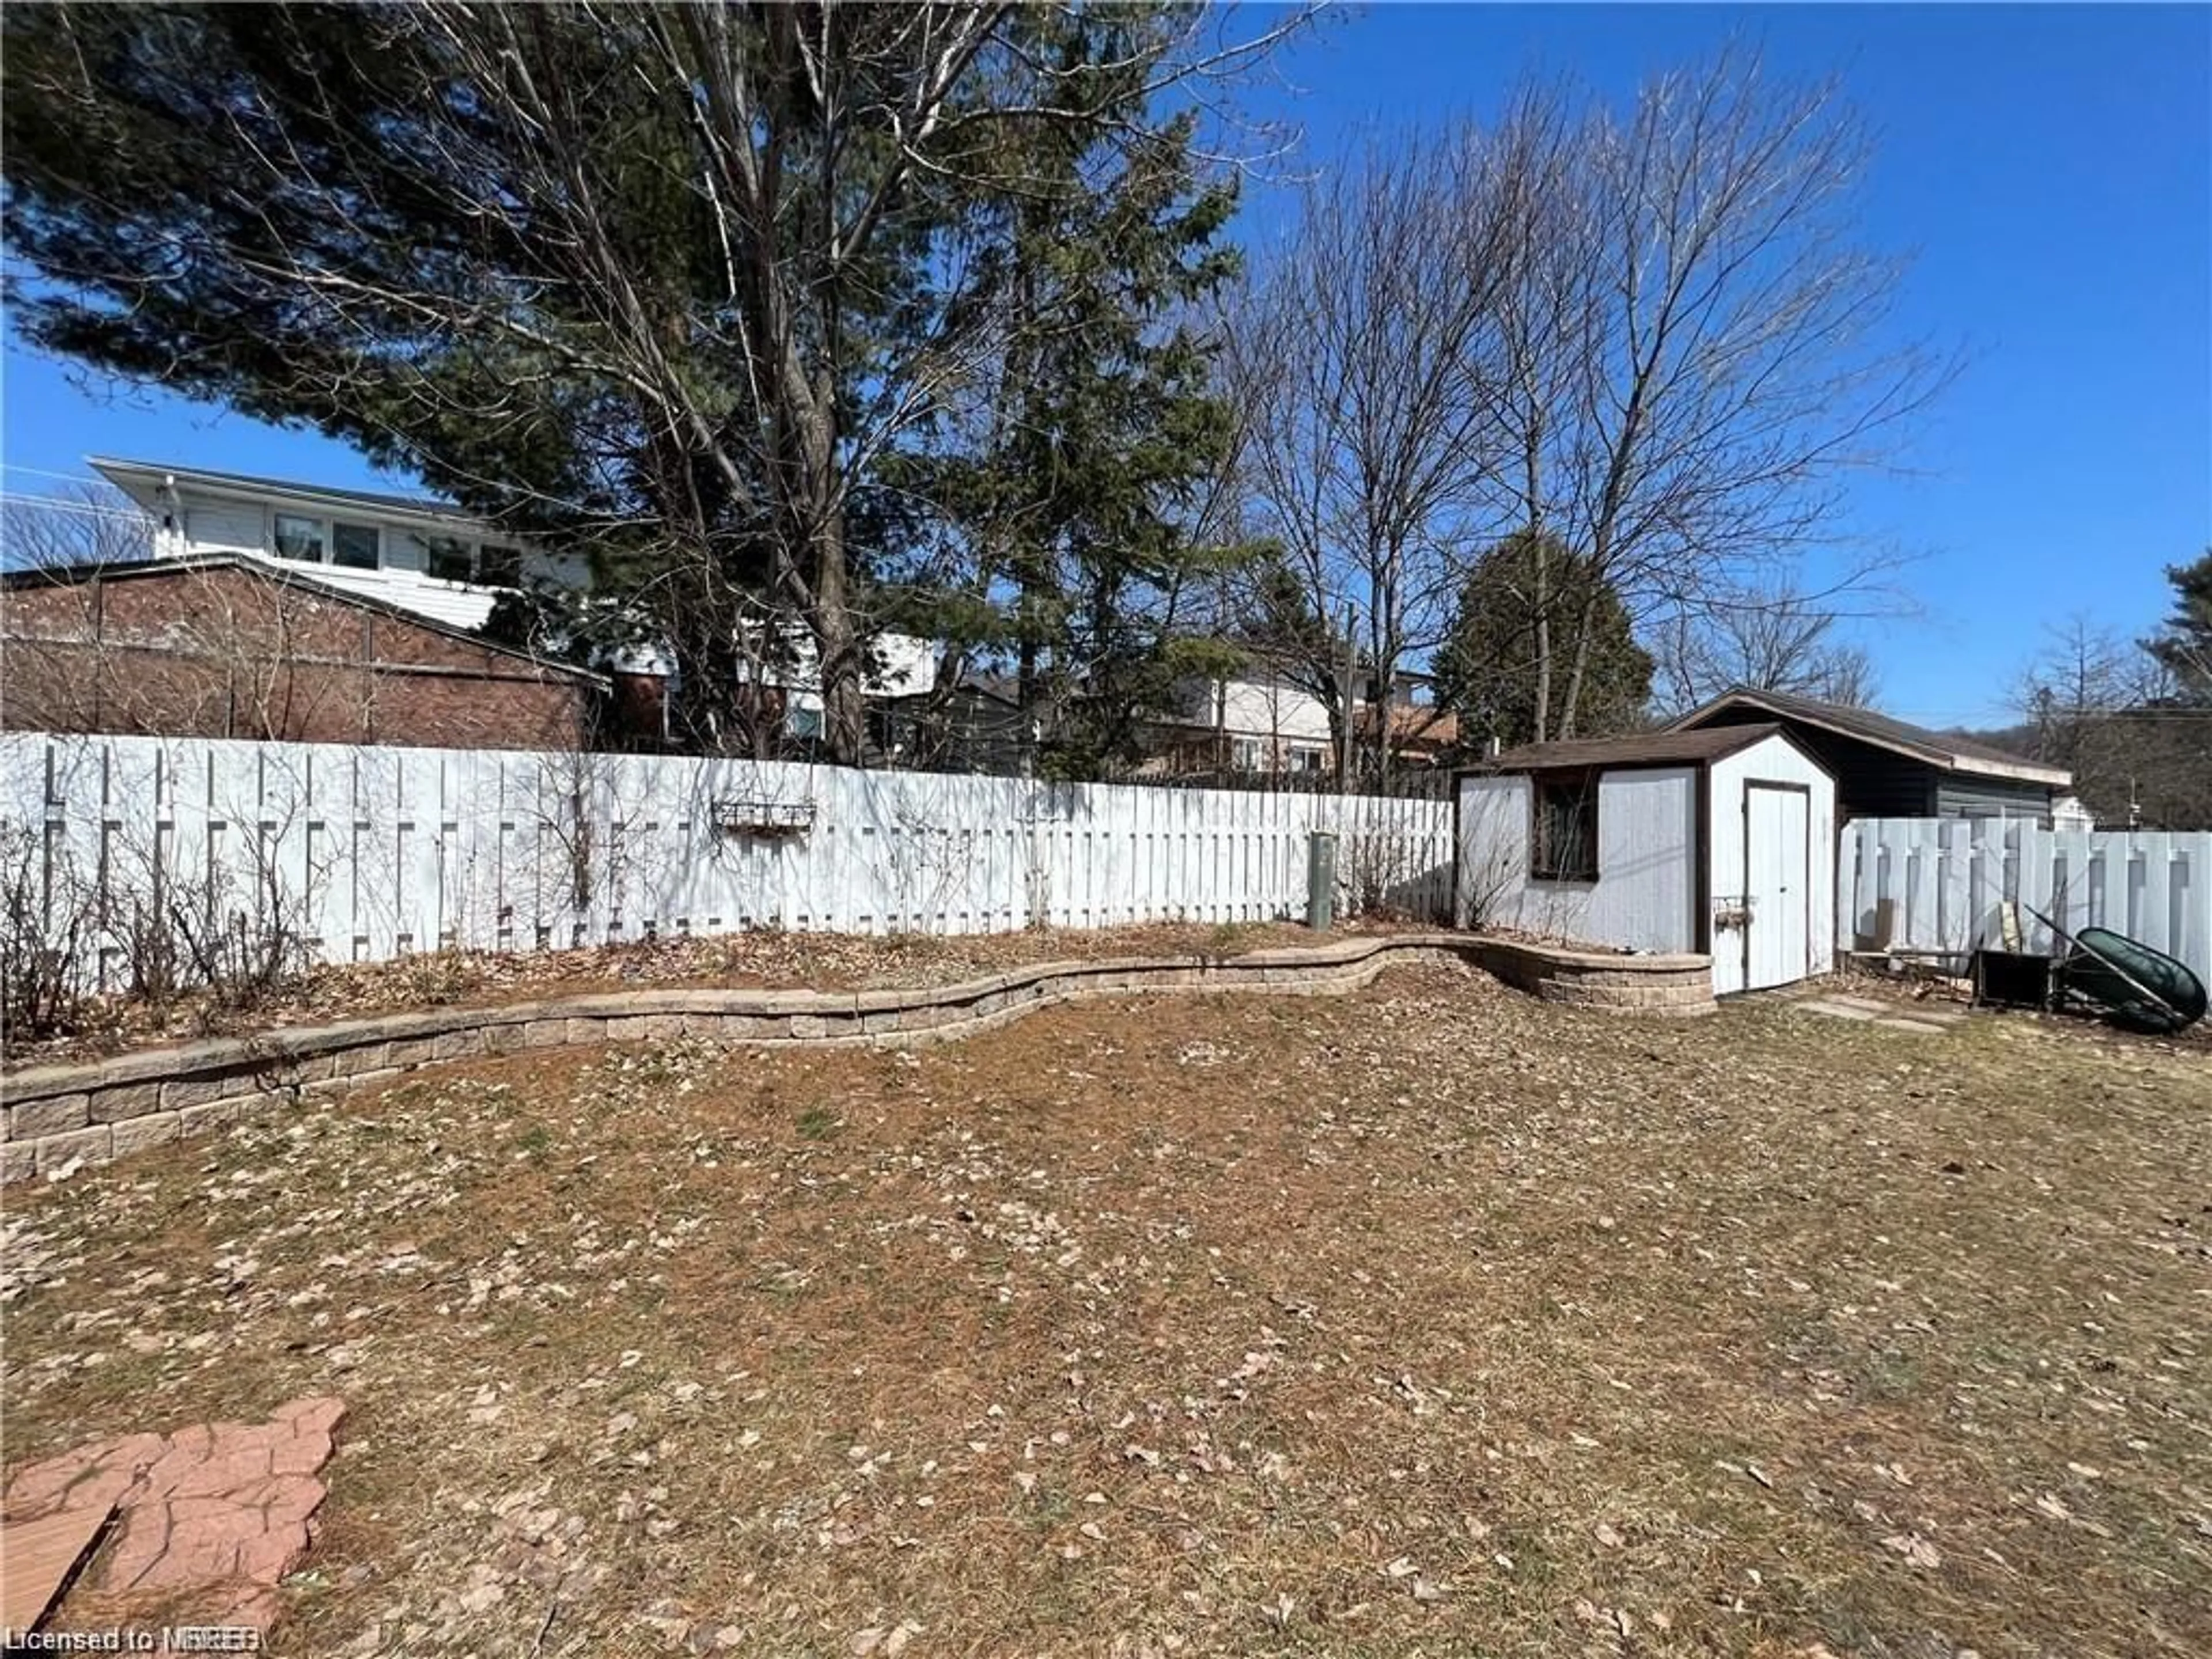 Fenced yard for 88 Beverly Rd, North Bay Ontario P1B 7P8